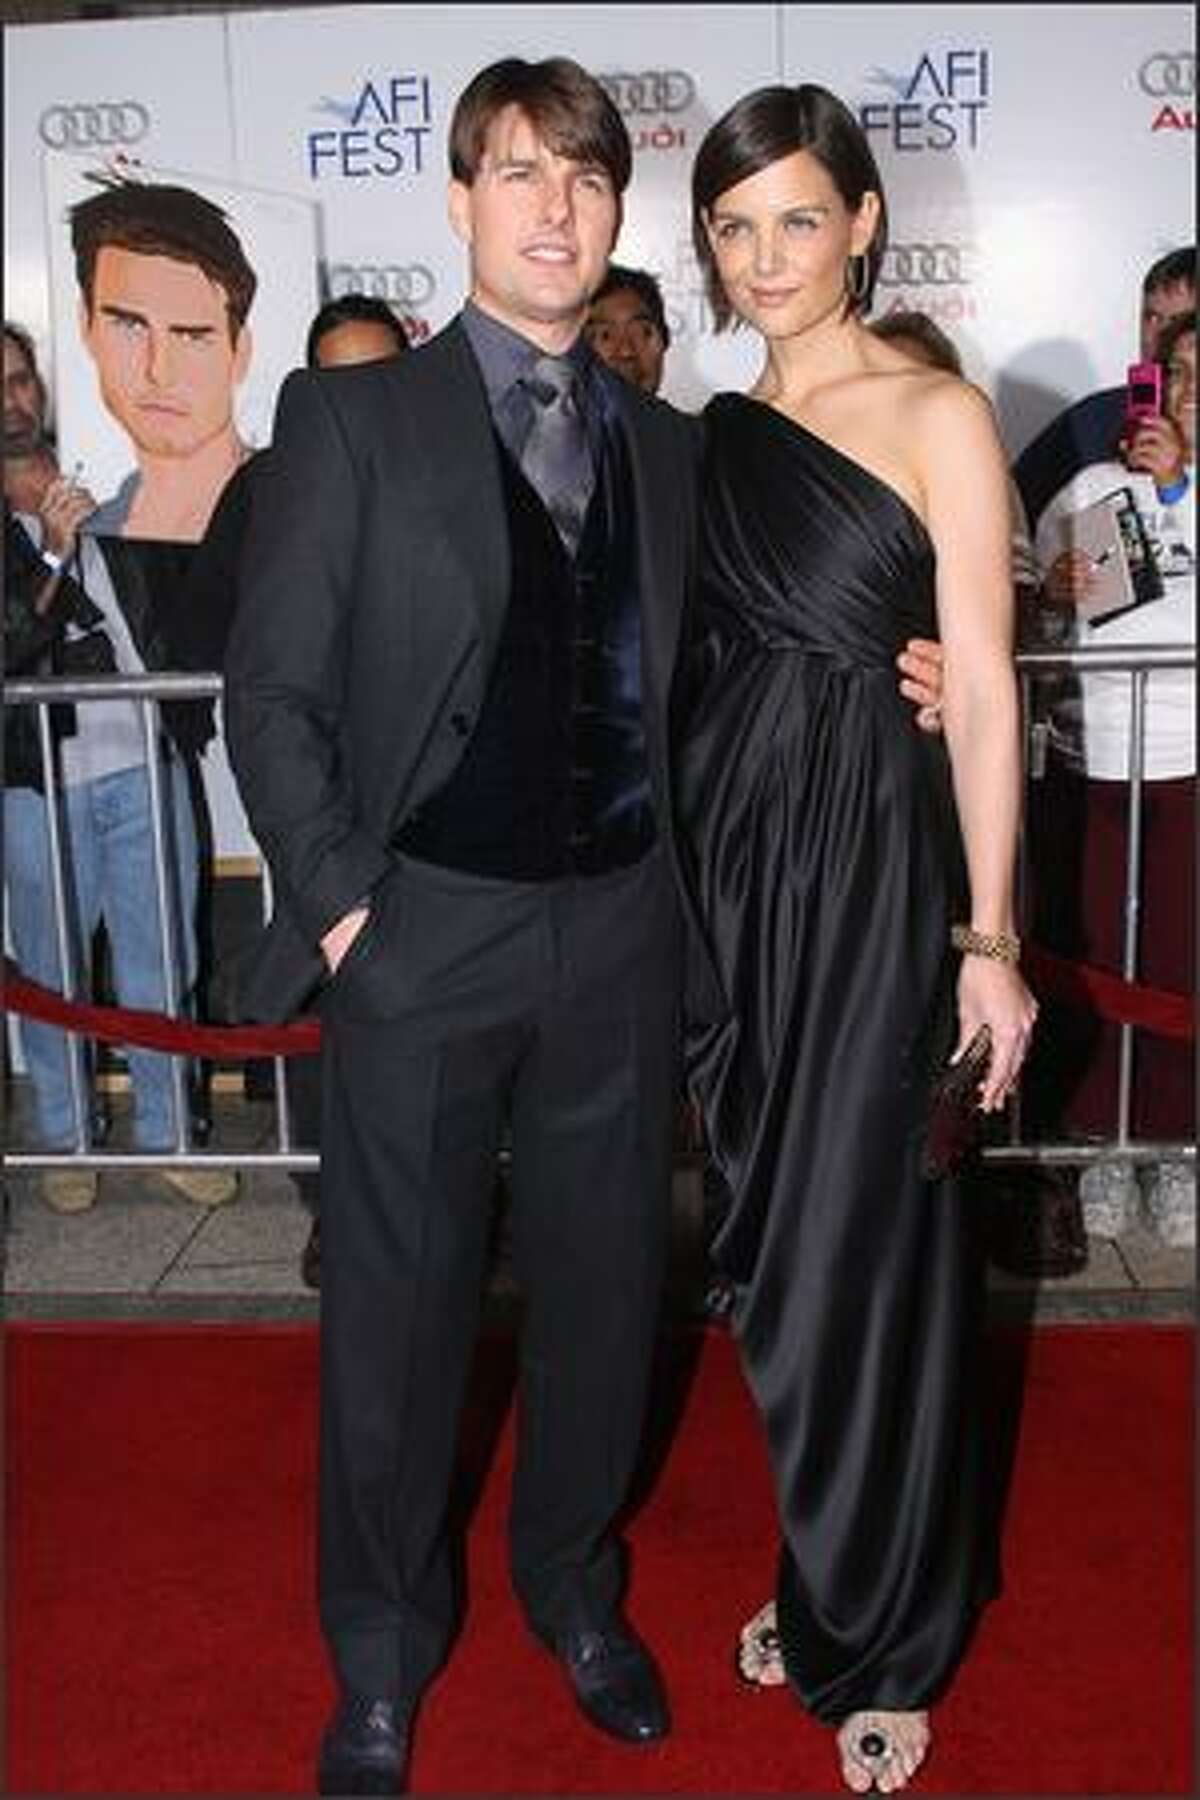 Cast member Tom Cruise and his wife Katie Holmes arrive for the AFI FEST 2007 opening night gala premiere of "Lions For Lambs" at the Arclight Cinerama Dome in Hollywood, Calif.